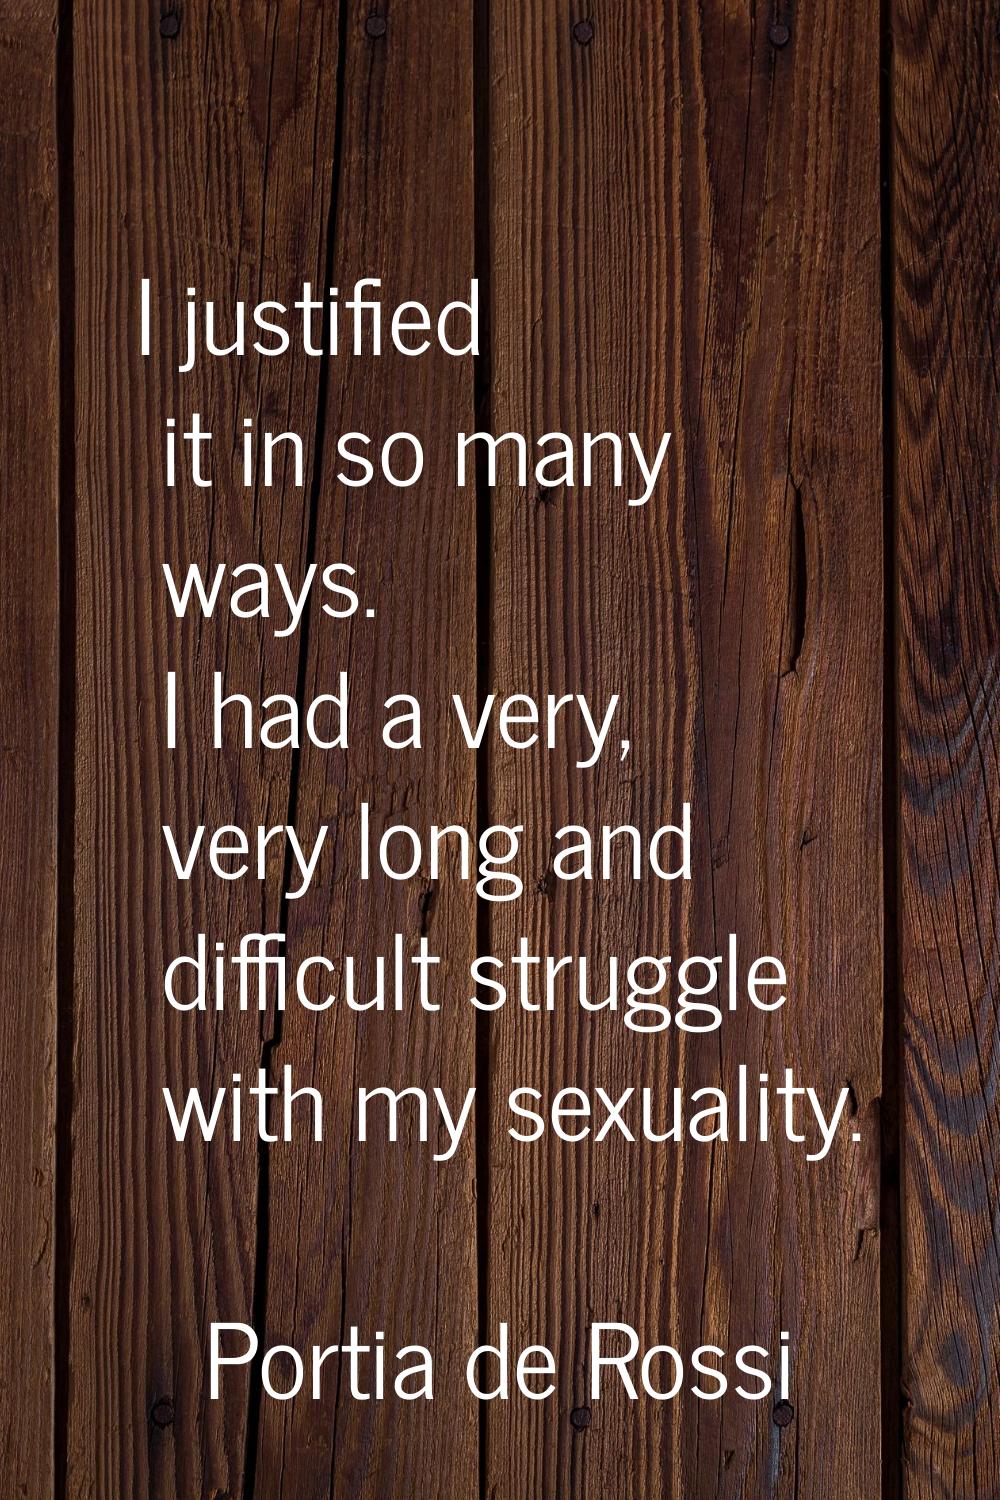 I justified it in so many ways. I had a very, very long and difficult struggle with my sexuality.